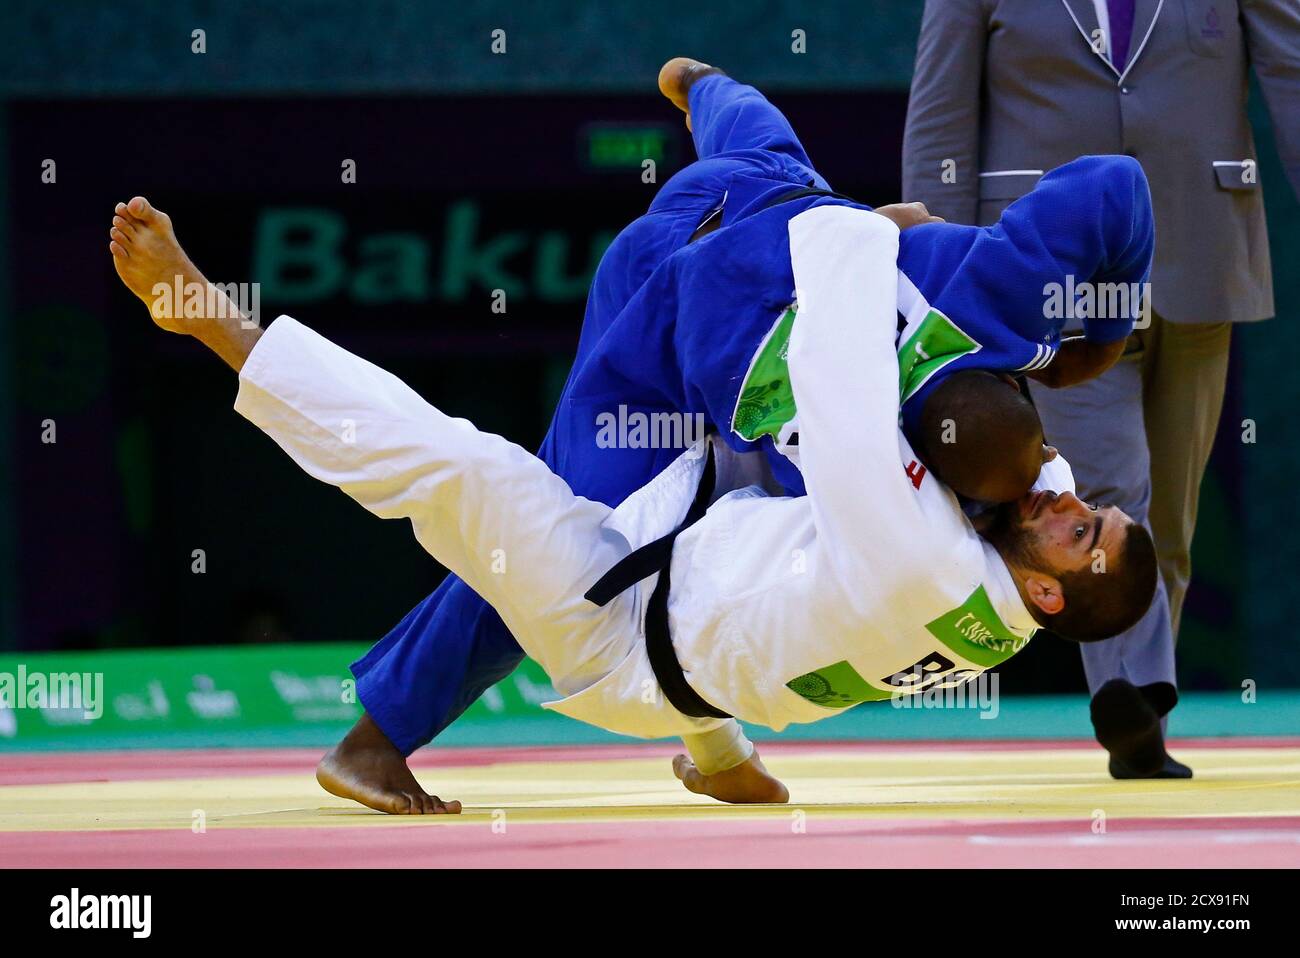 Toma Nikiforov Of Belgium And Jorge Fonseca Of Portugal Fight During Their Men S Judo Under 100kg